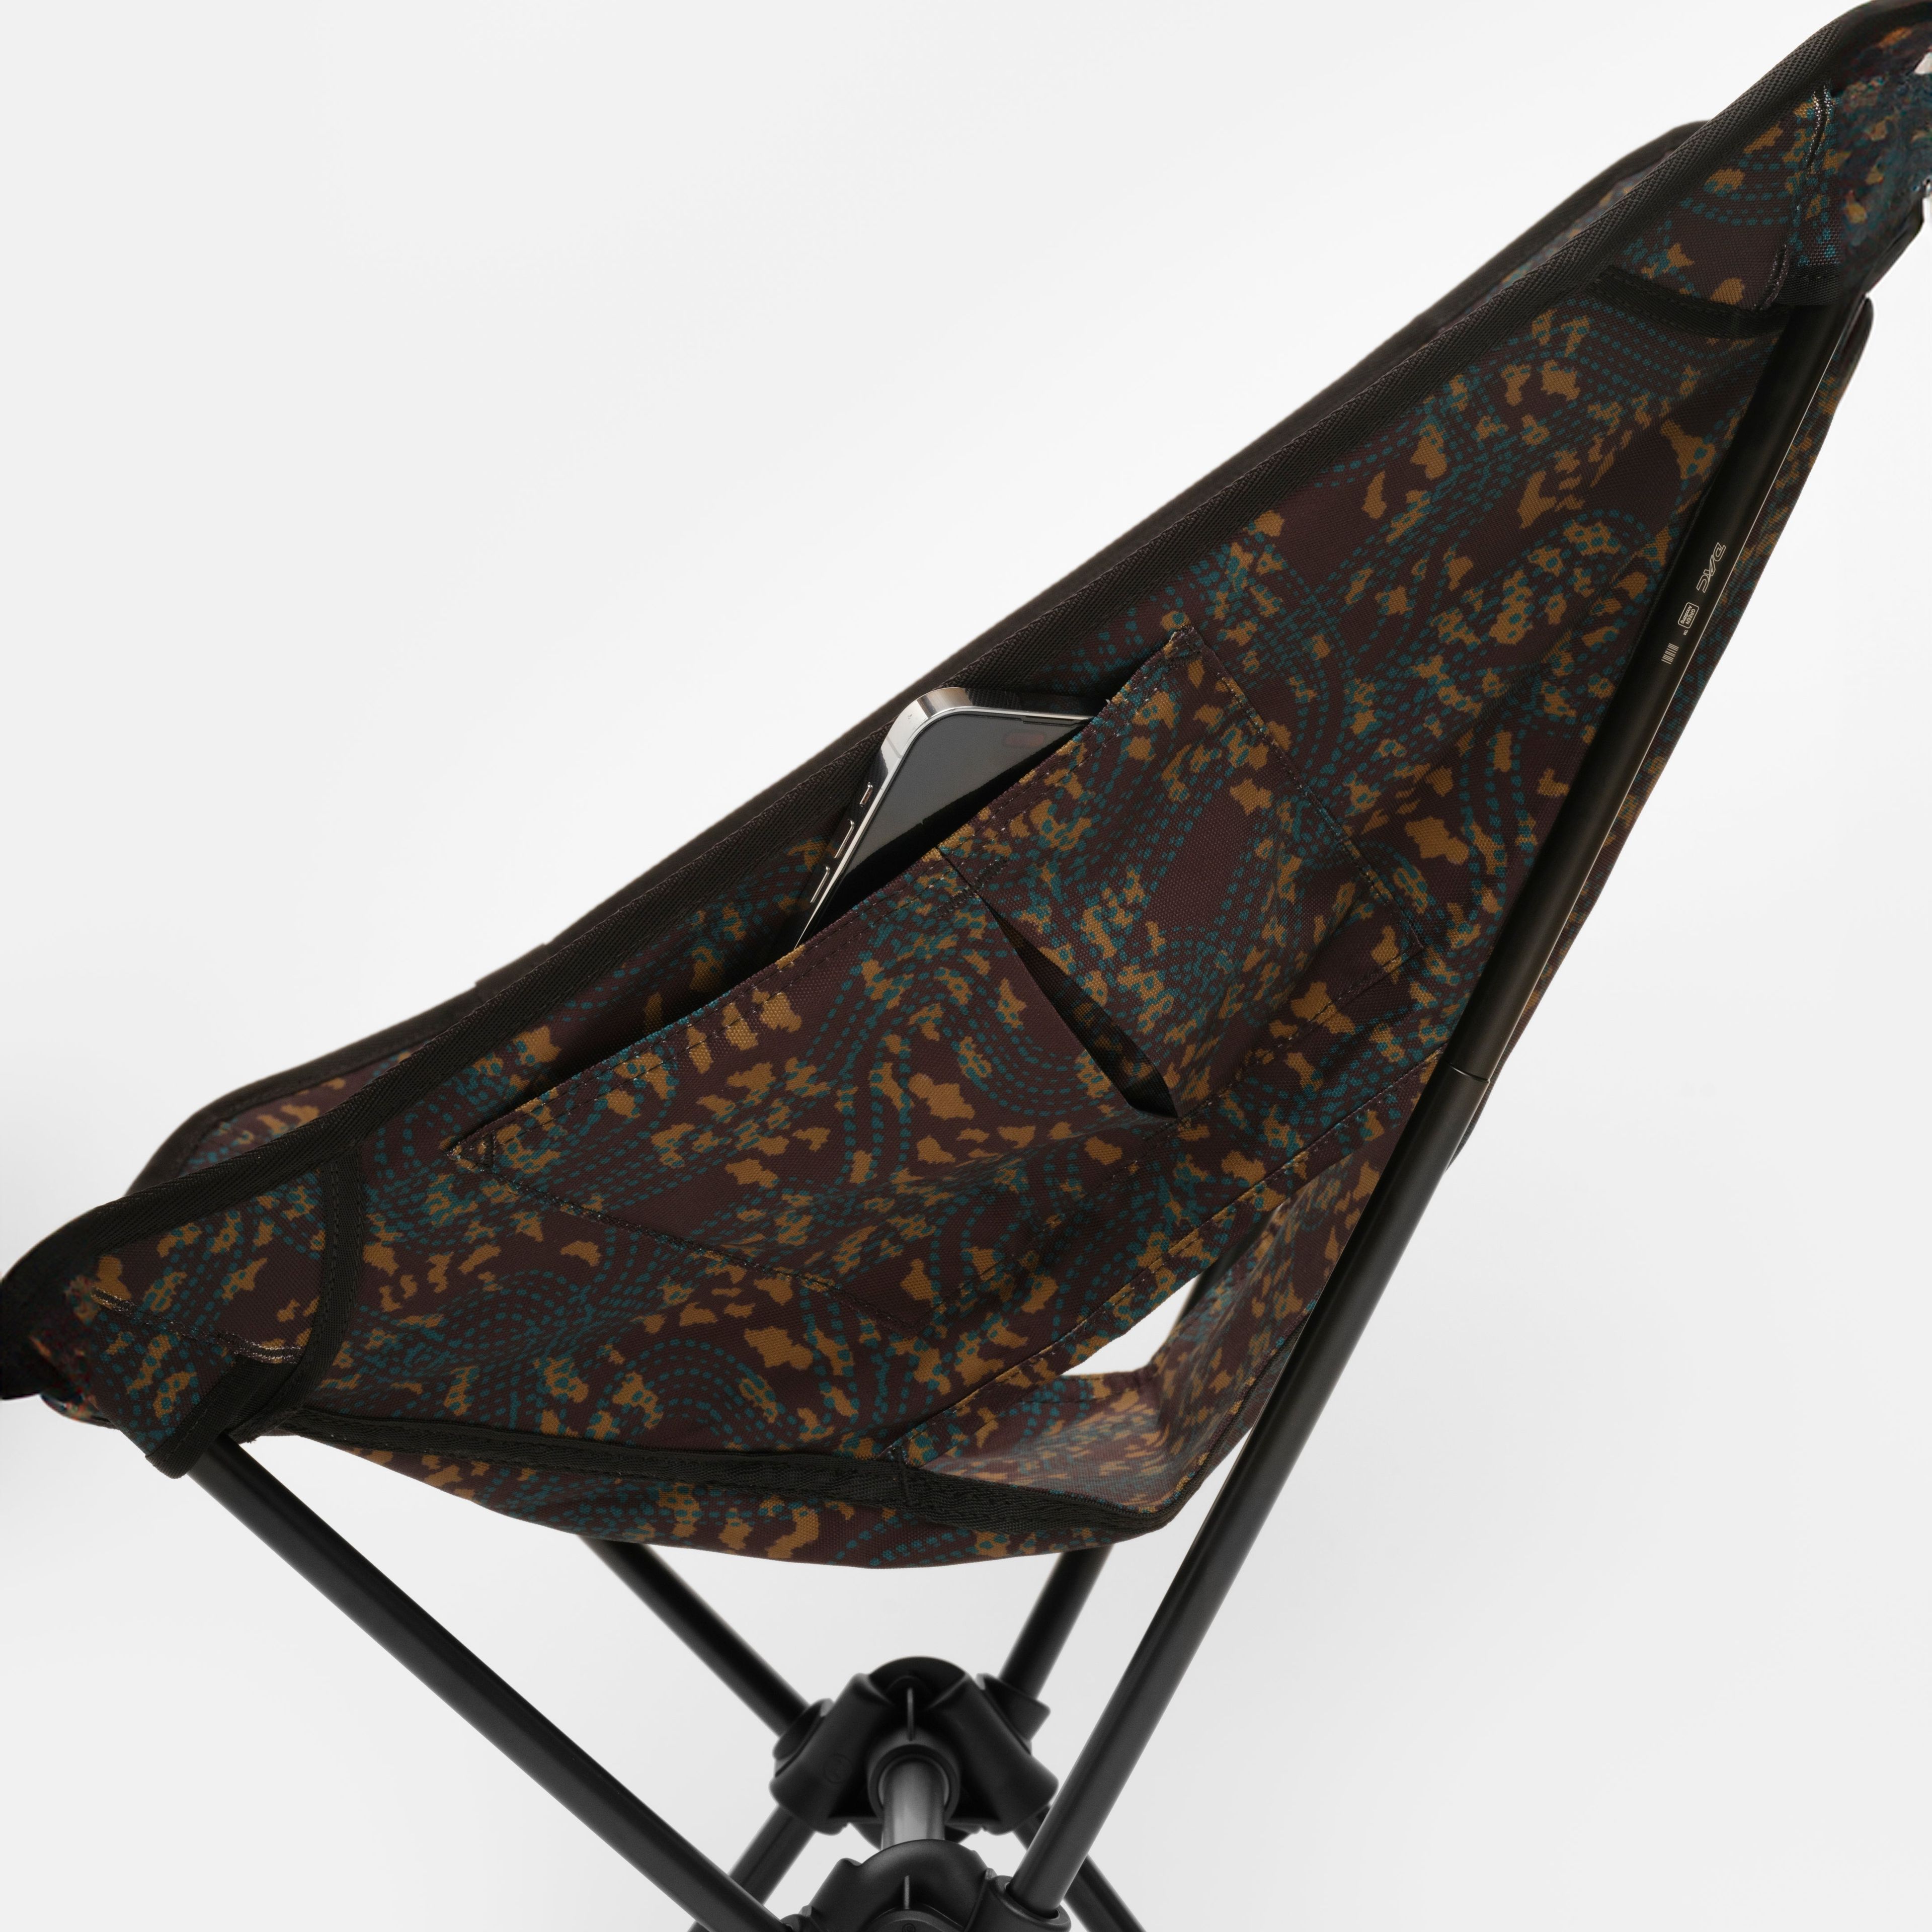 Helinox Tactical Chair One - Obsidian "Tracks" Printed 600d Recycled Polyester Canvas